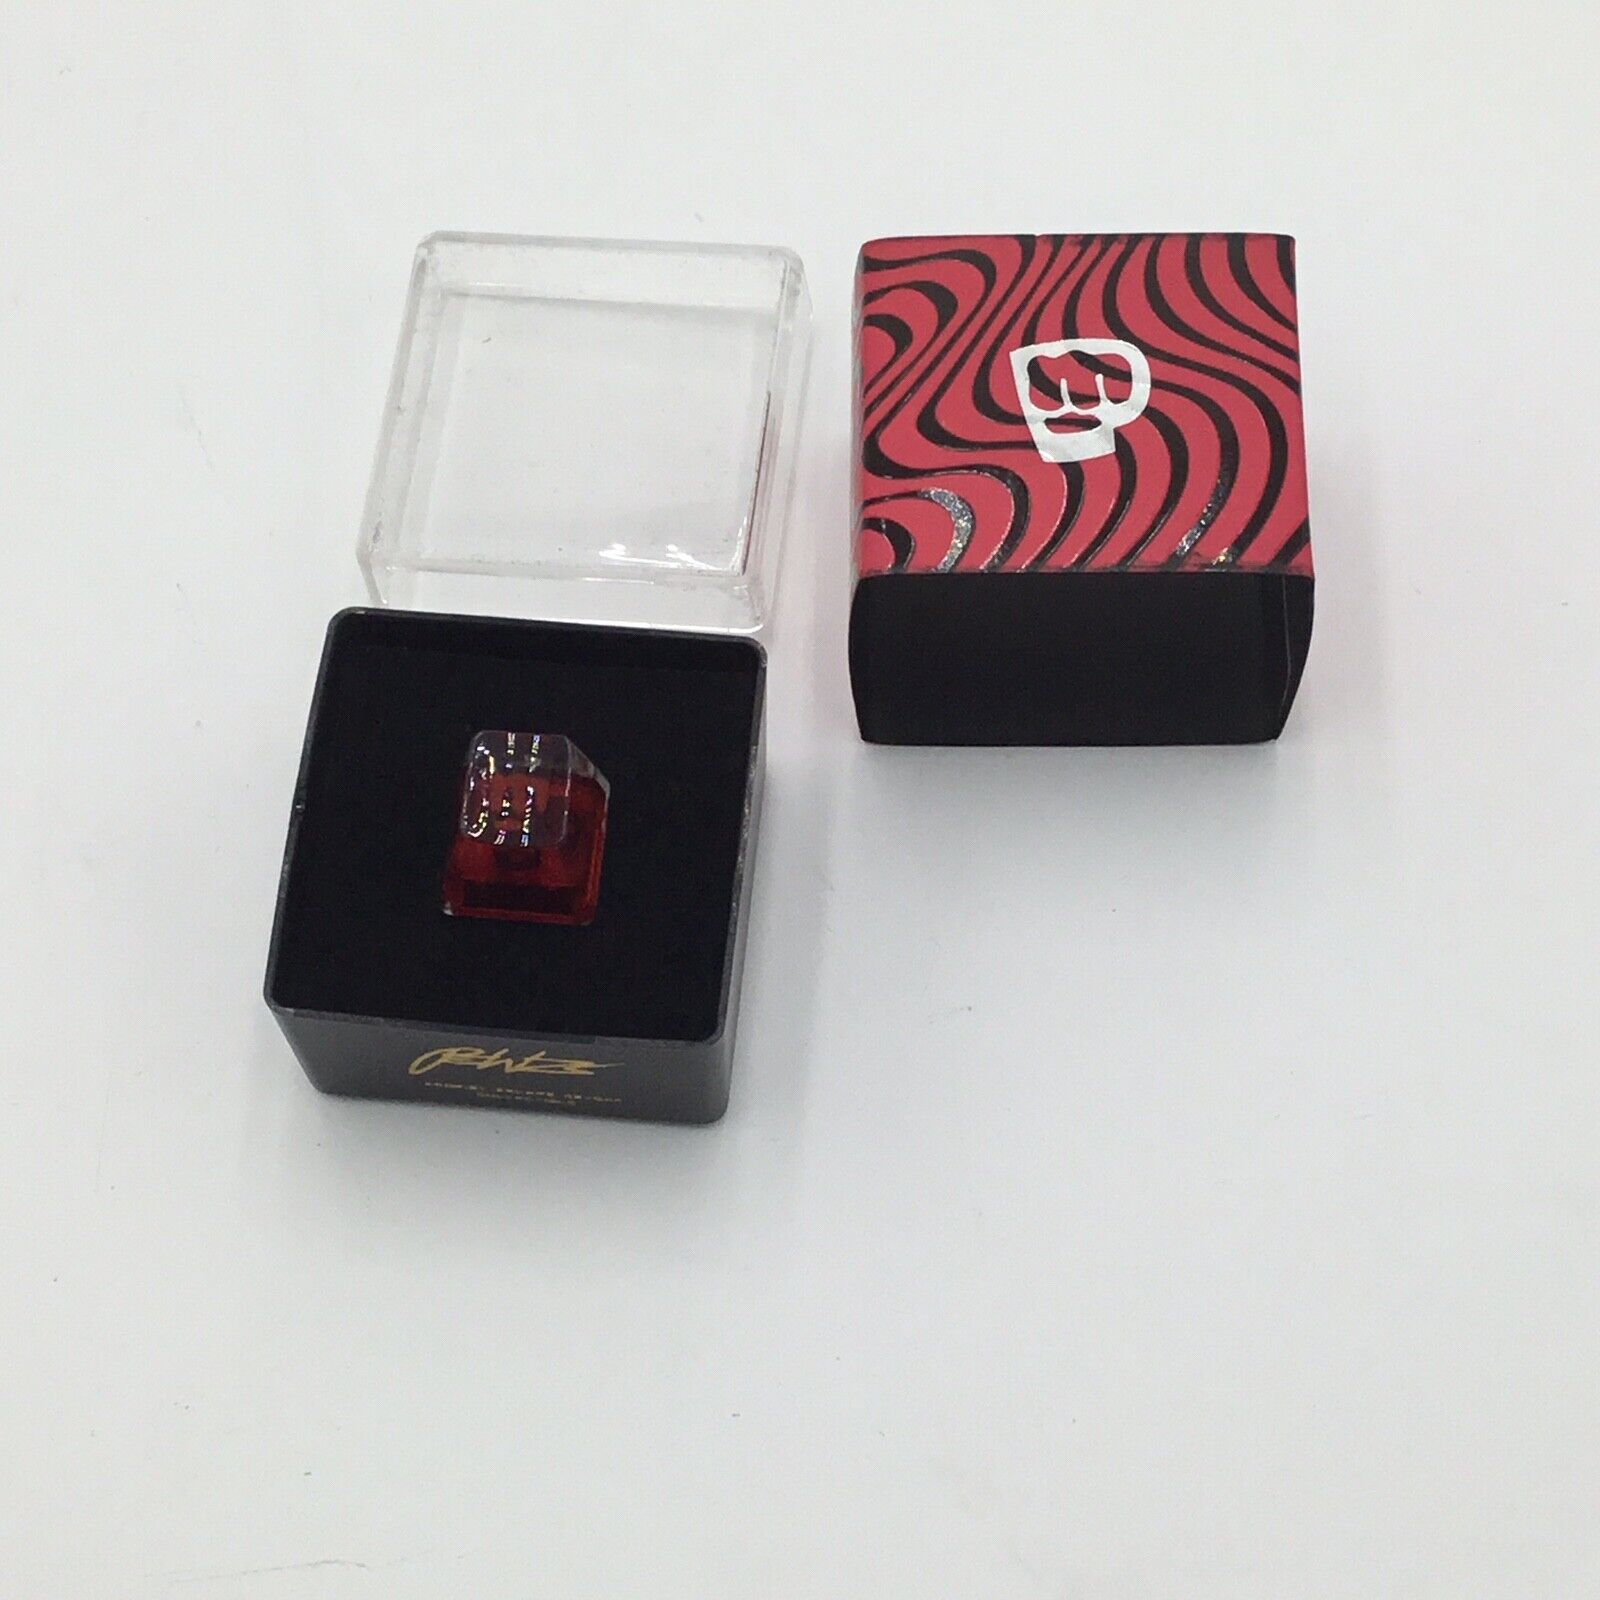 Pewdiepie Ghost Keyboards Brofist ESC Keycap Super Rare Out Of 5000 Ever Made